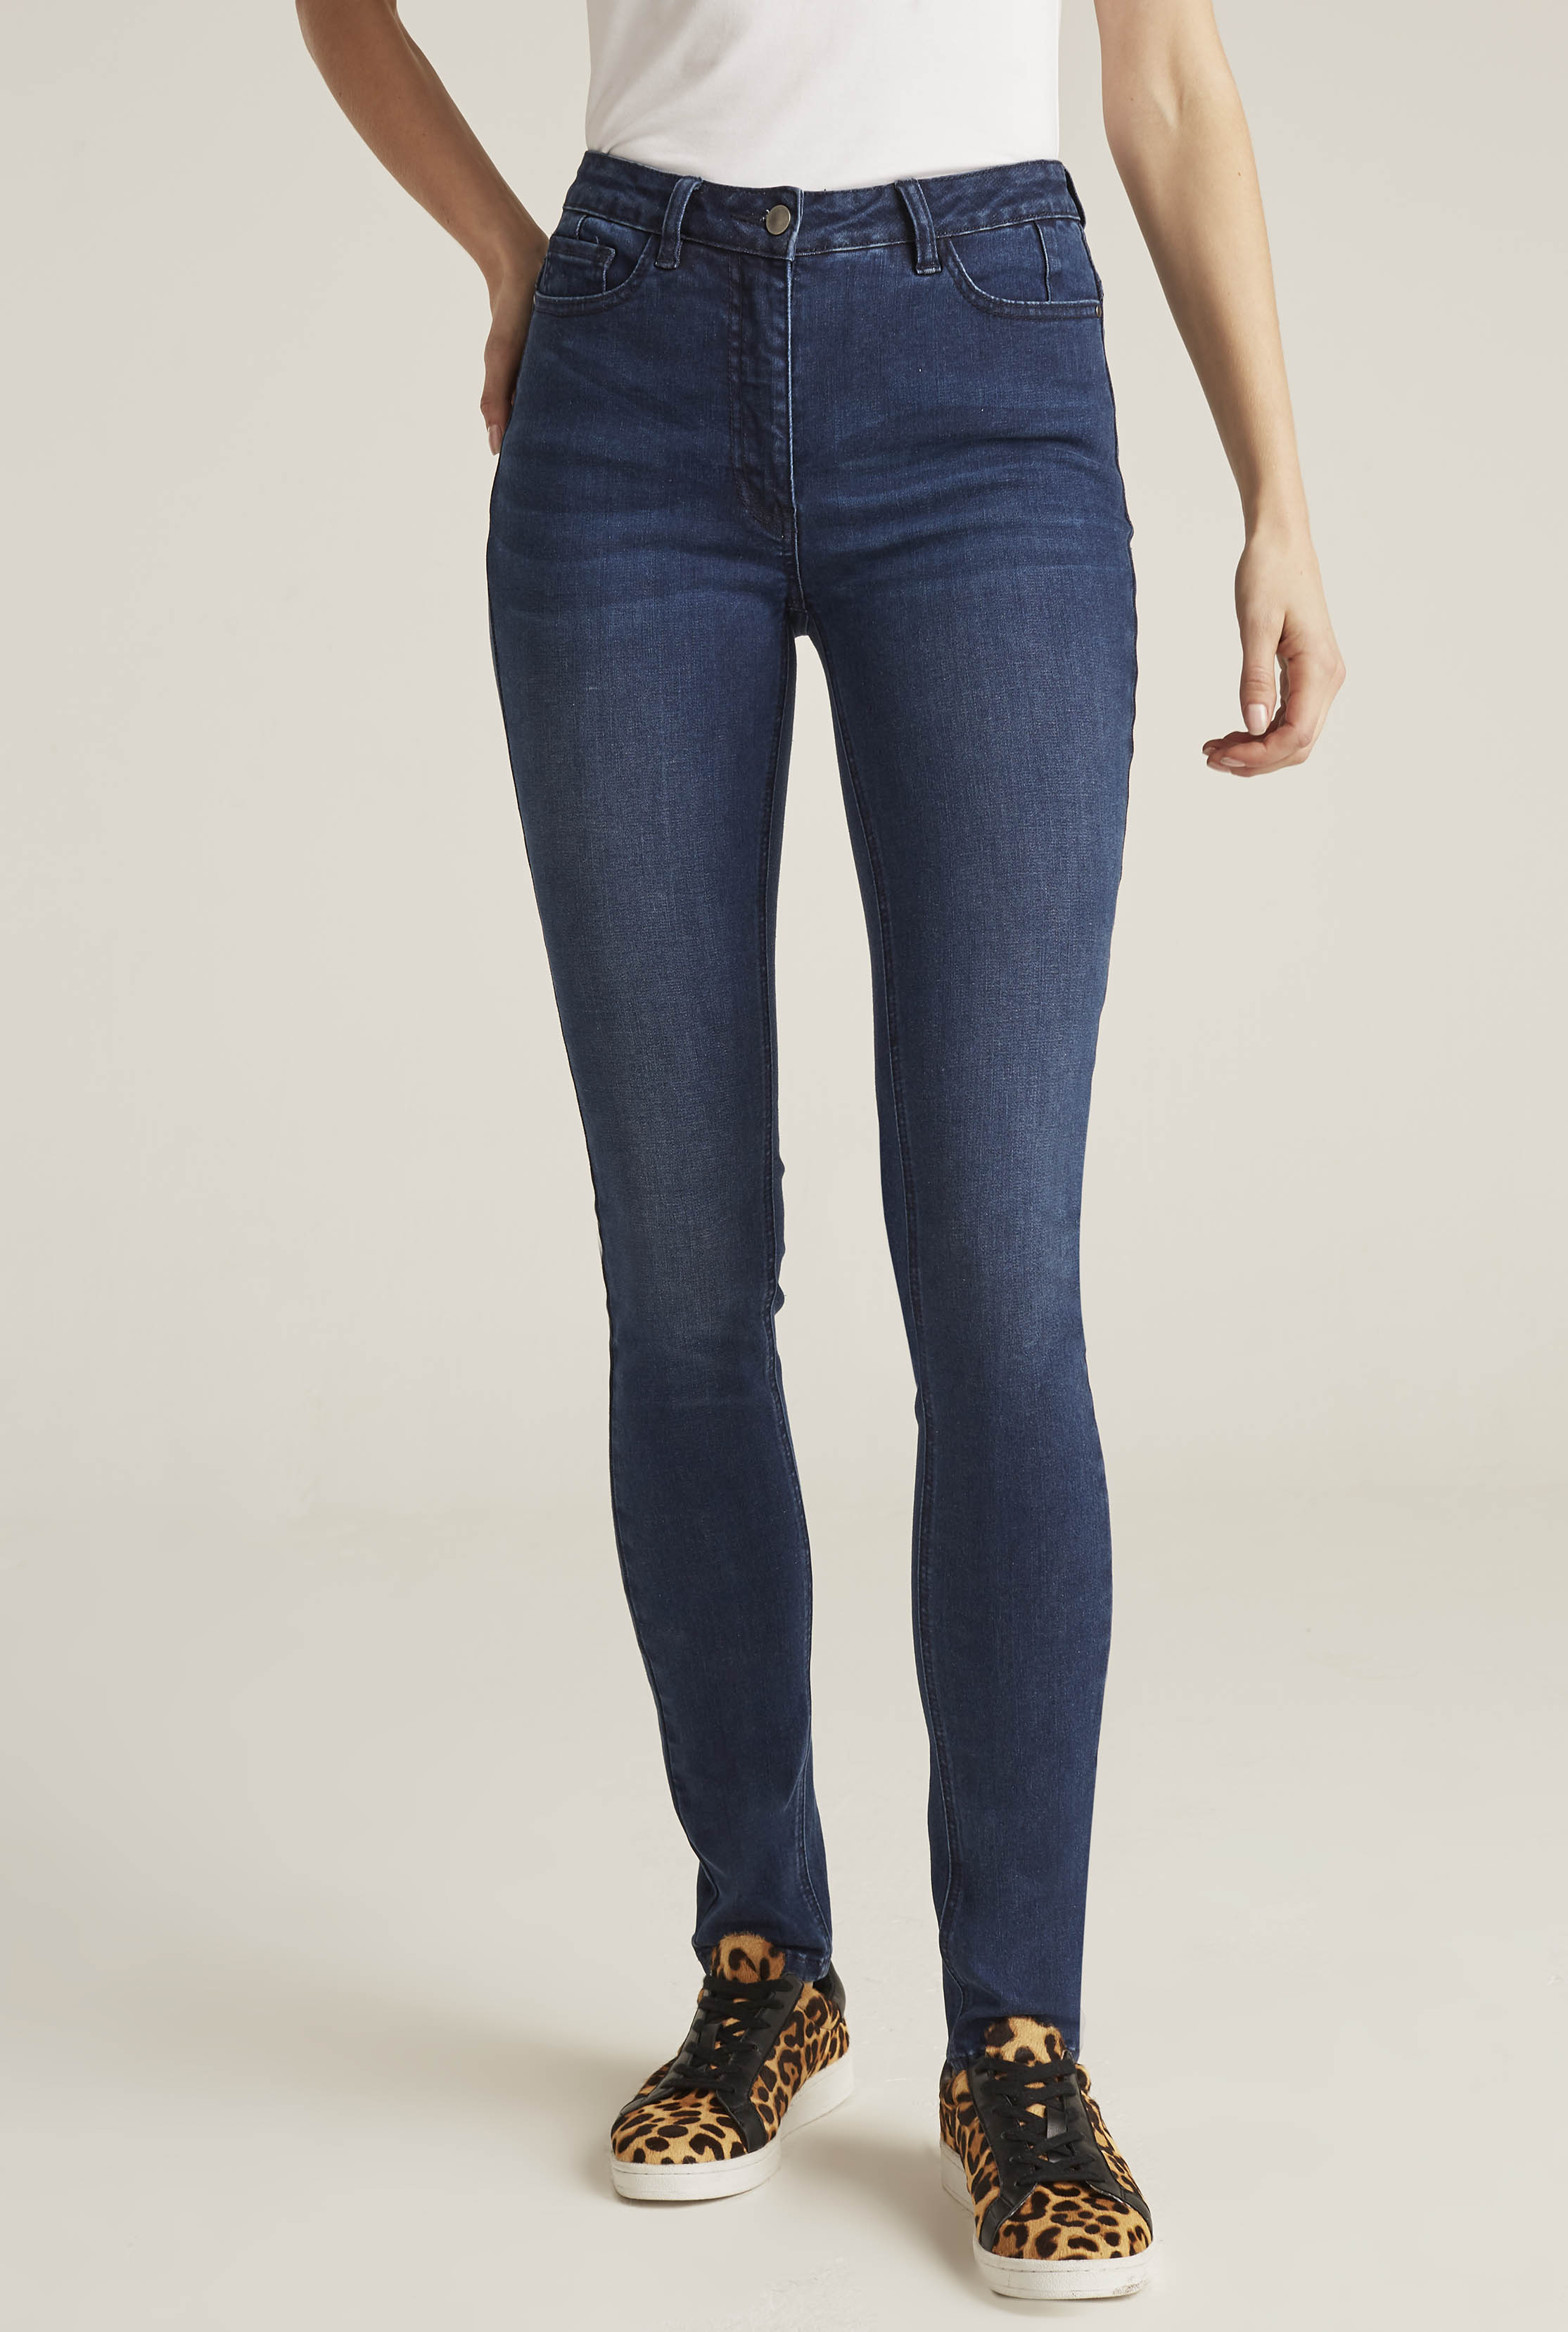 Contour Skinny Mid Rise Jean | Long Tall Sally